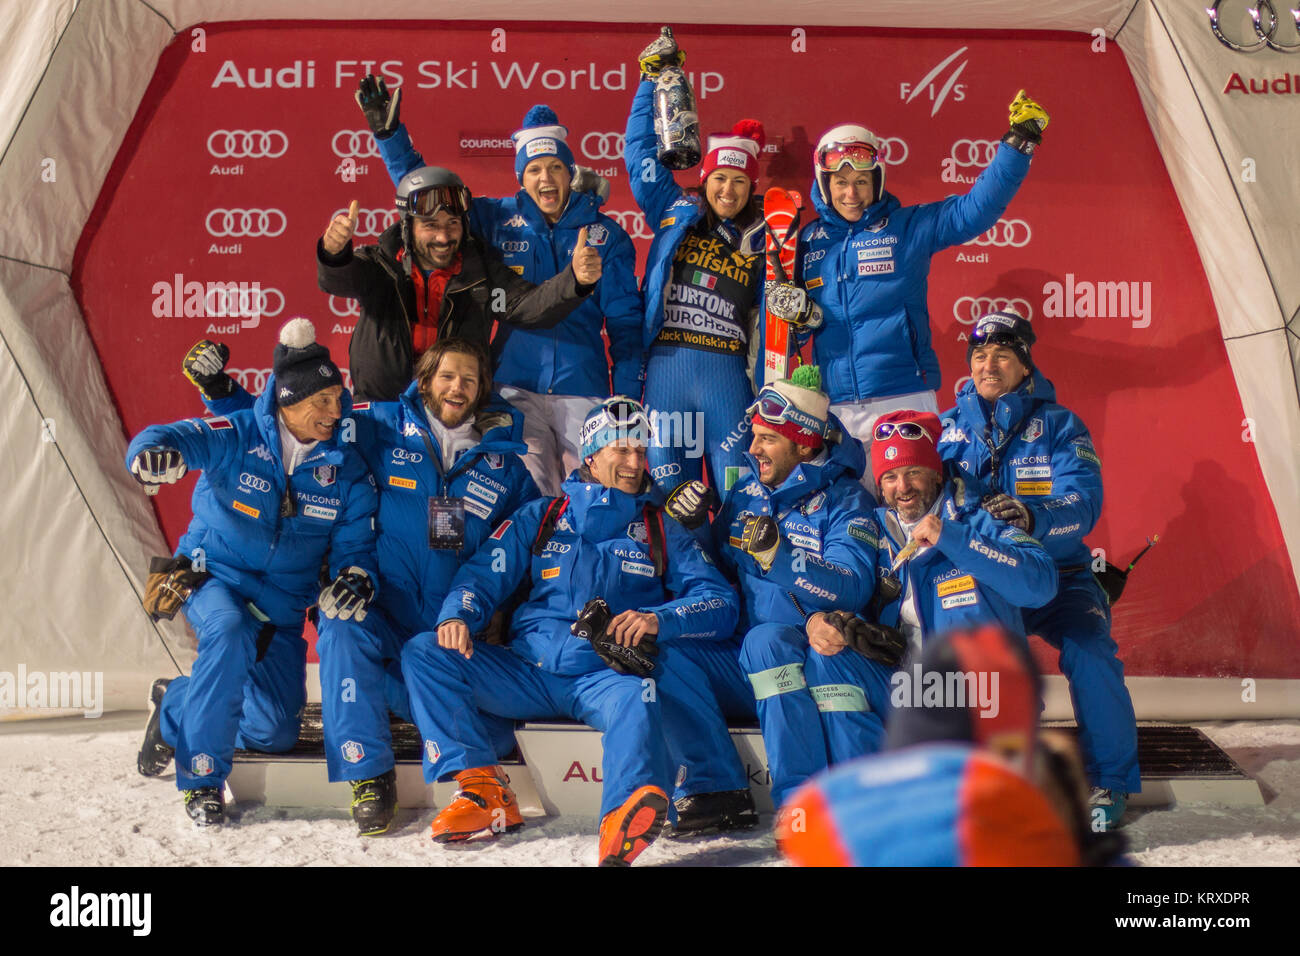 Italian Ski Team happy after the great podium results from Irene Curtoni and Manuela Moelgg in Courchevel Giant Slalom and Parallel slalom vaild for the Audi Fis Alpine Ski World Cup 2017 / 2018 Stock Photo